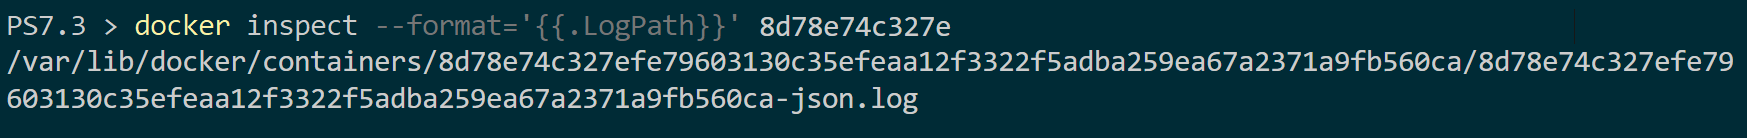 Accessing the Docker logs location